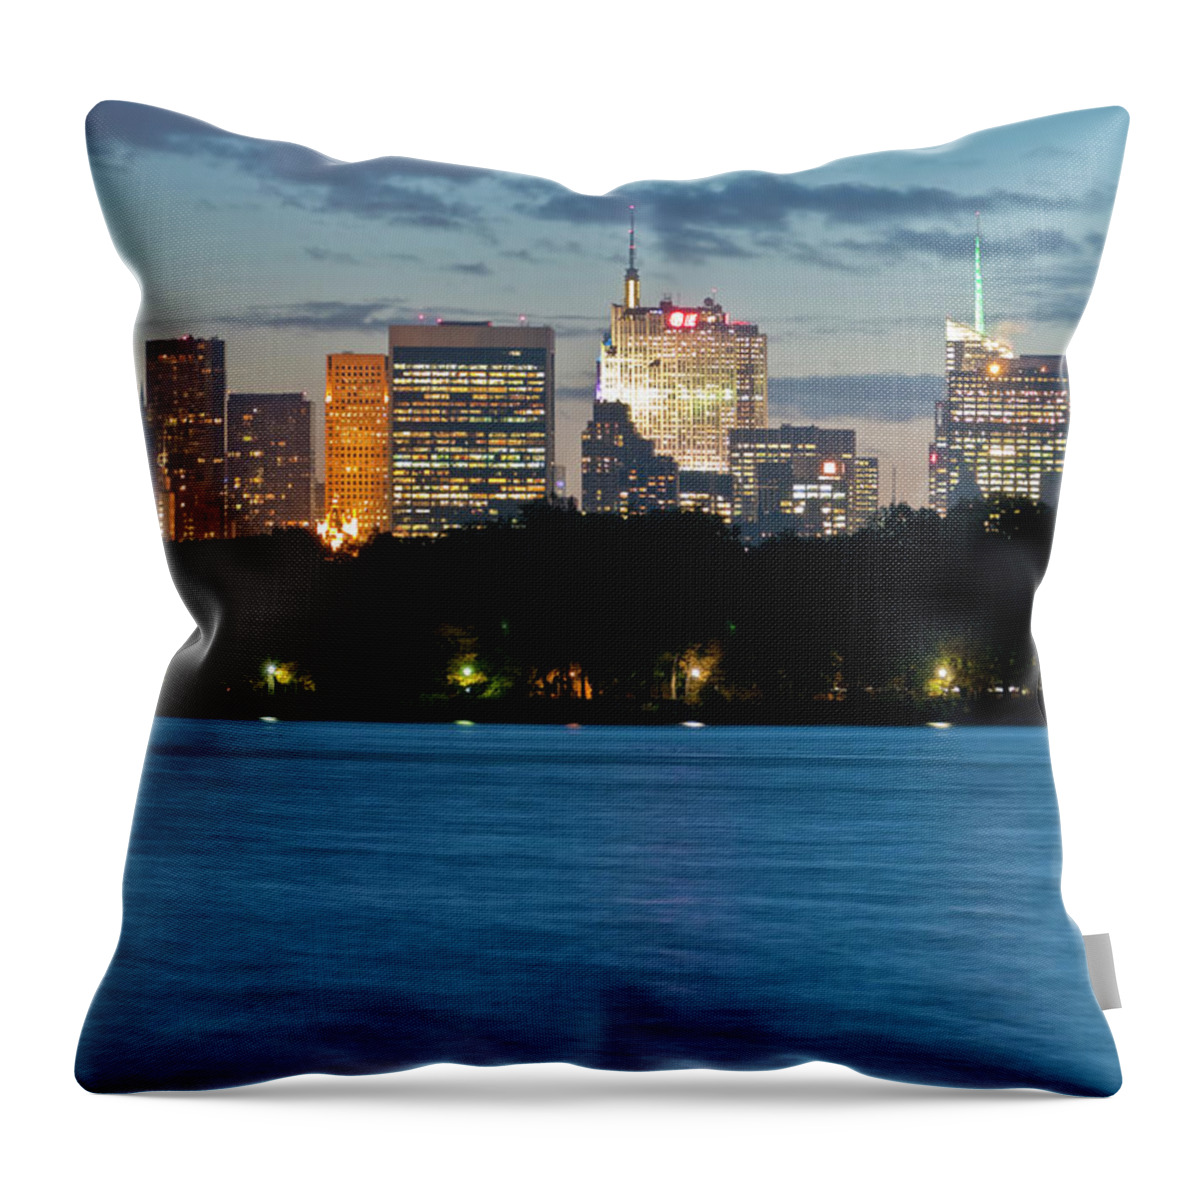 Nyc Throw Pillow featuring the photograph Great Pond Skyline by S Paul Sahm